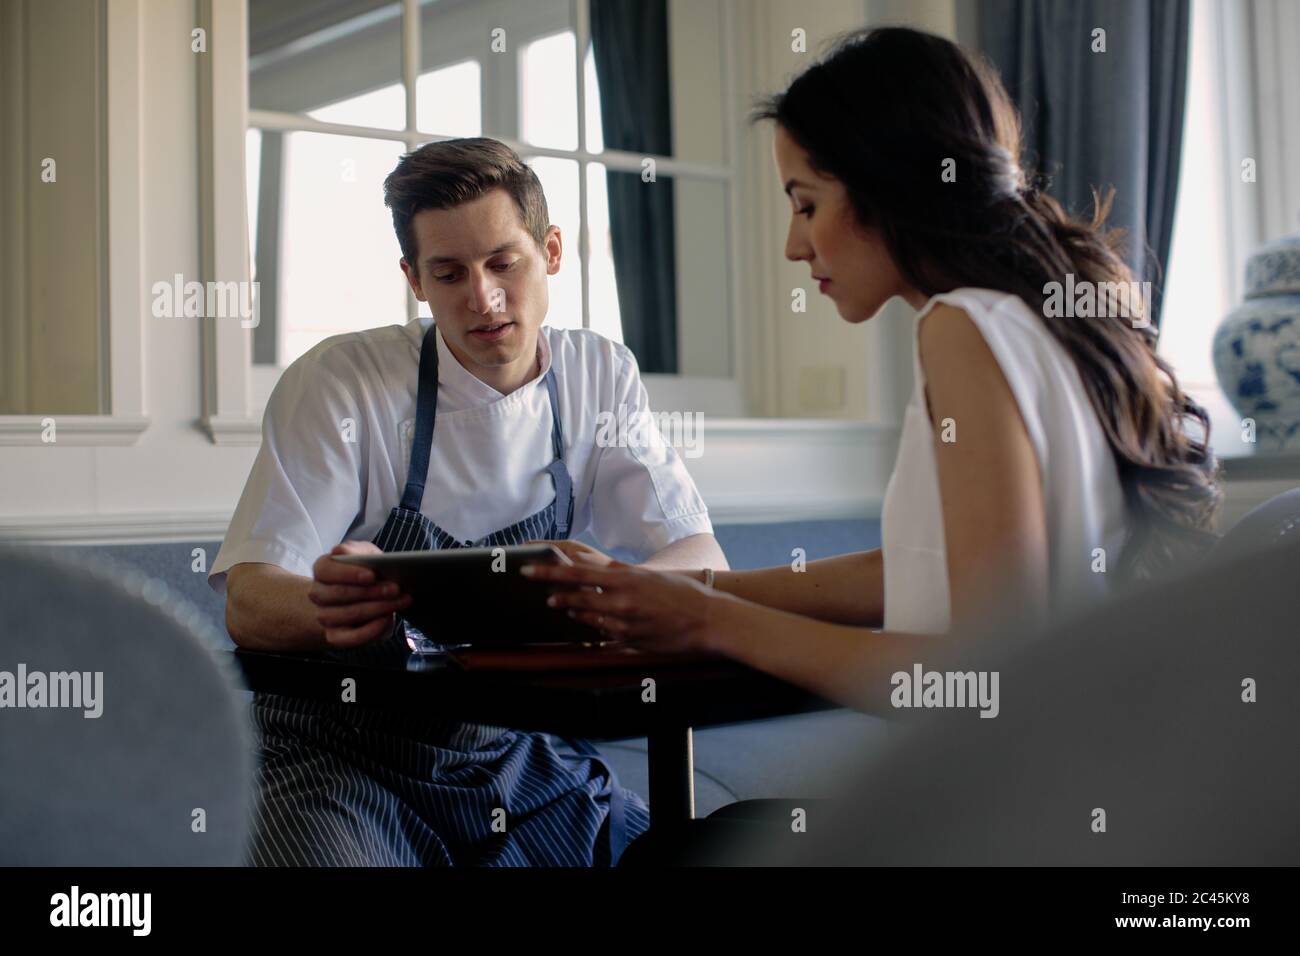 Chef wearing blue apron and woman sitting at a table, looking at digital tablet. Stock Photo